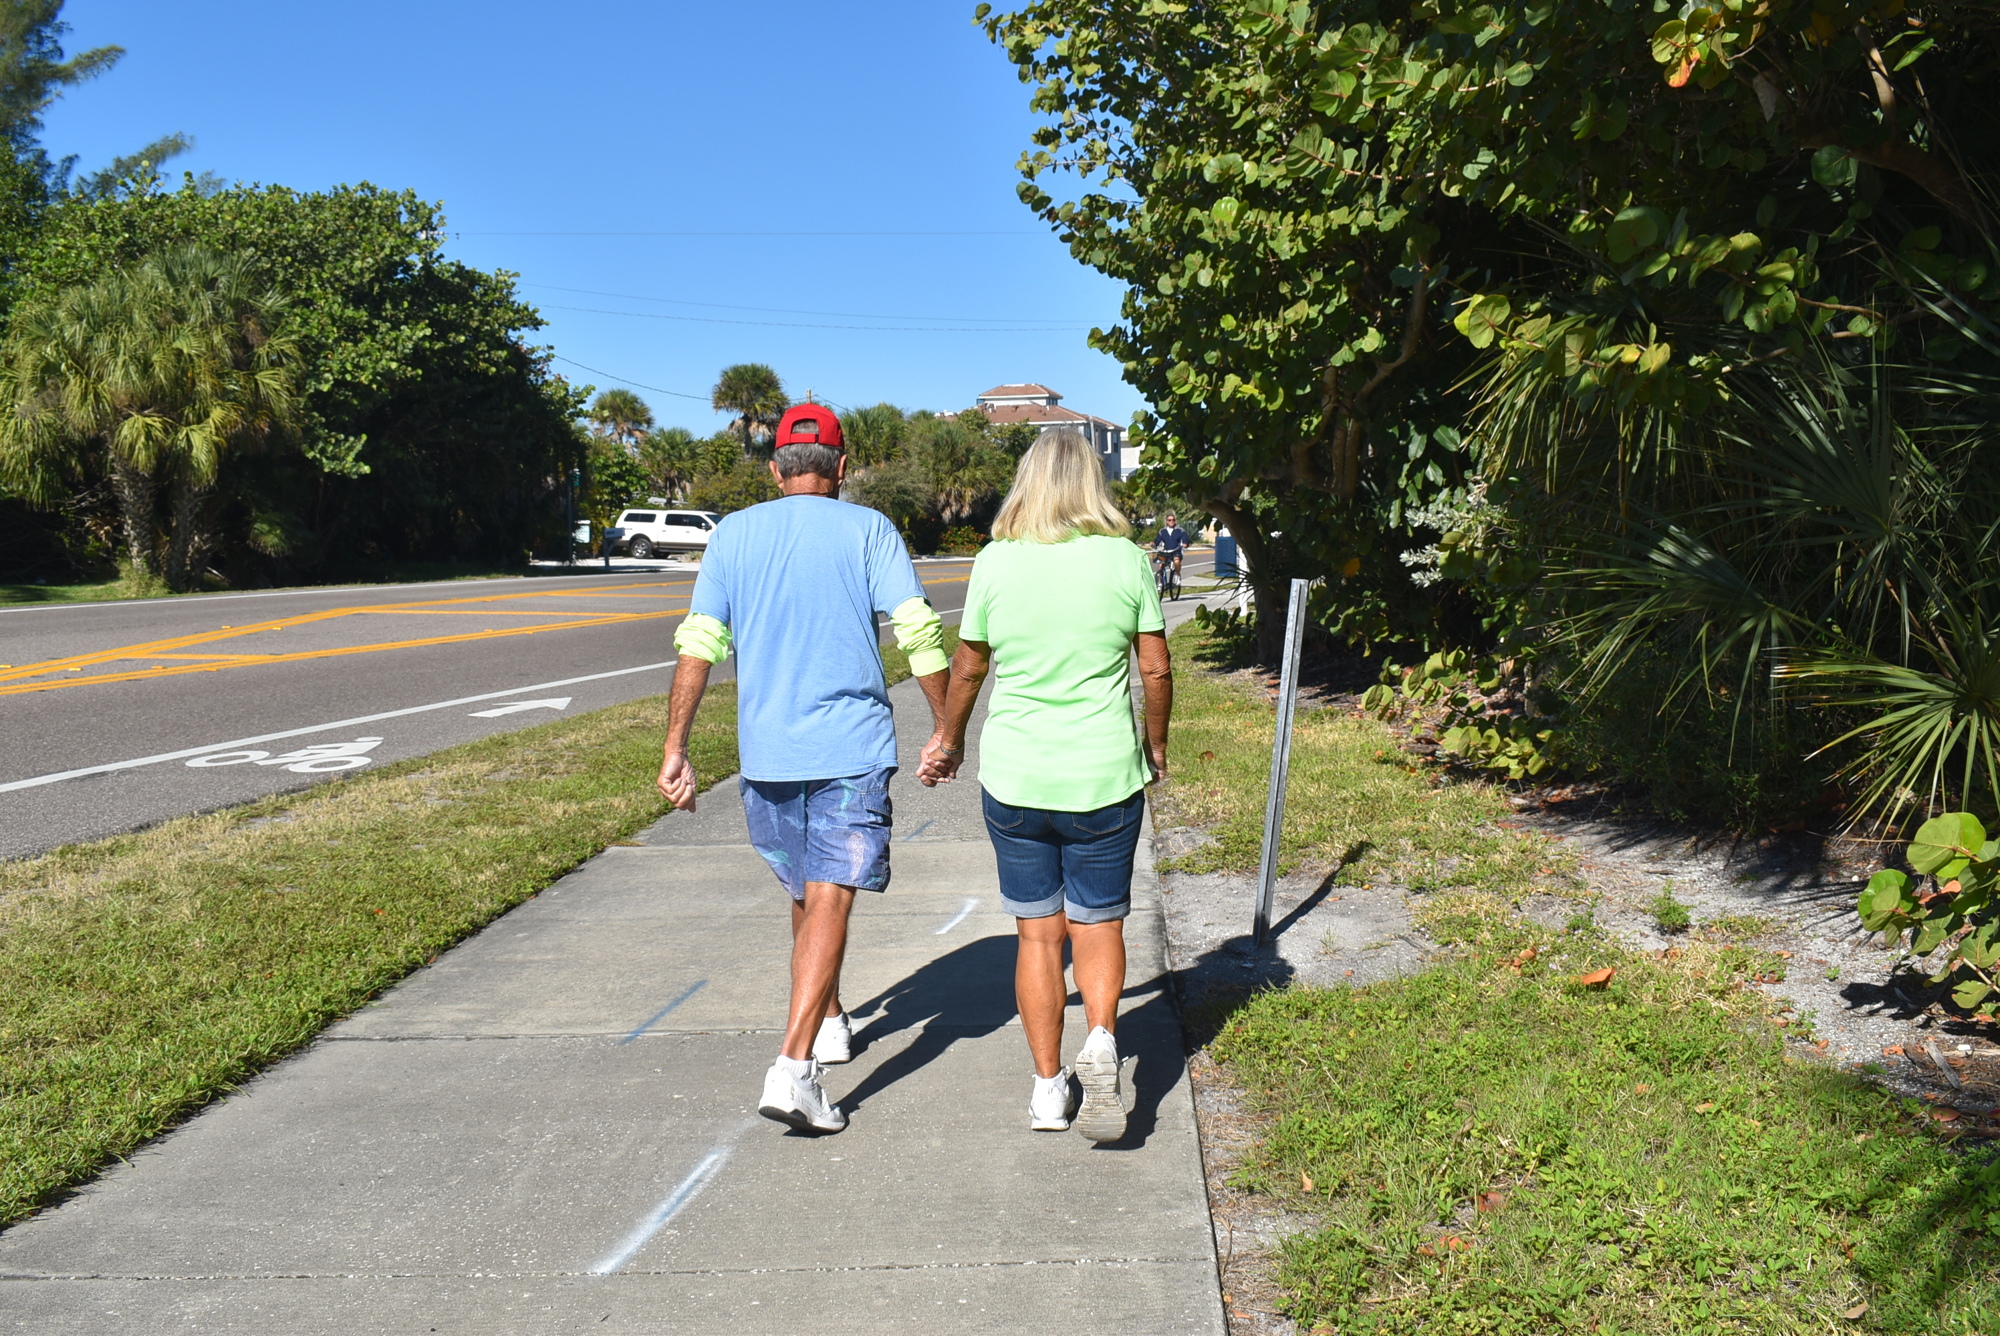 Kirt and Mary Ann Bopp hold hands as they walk.